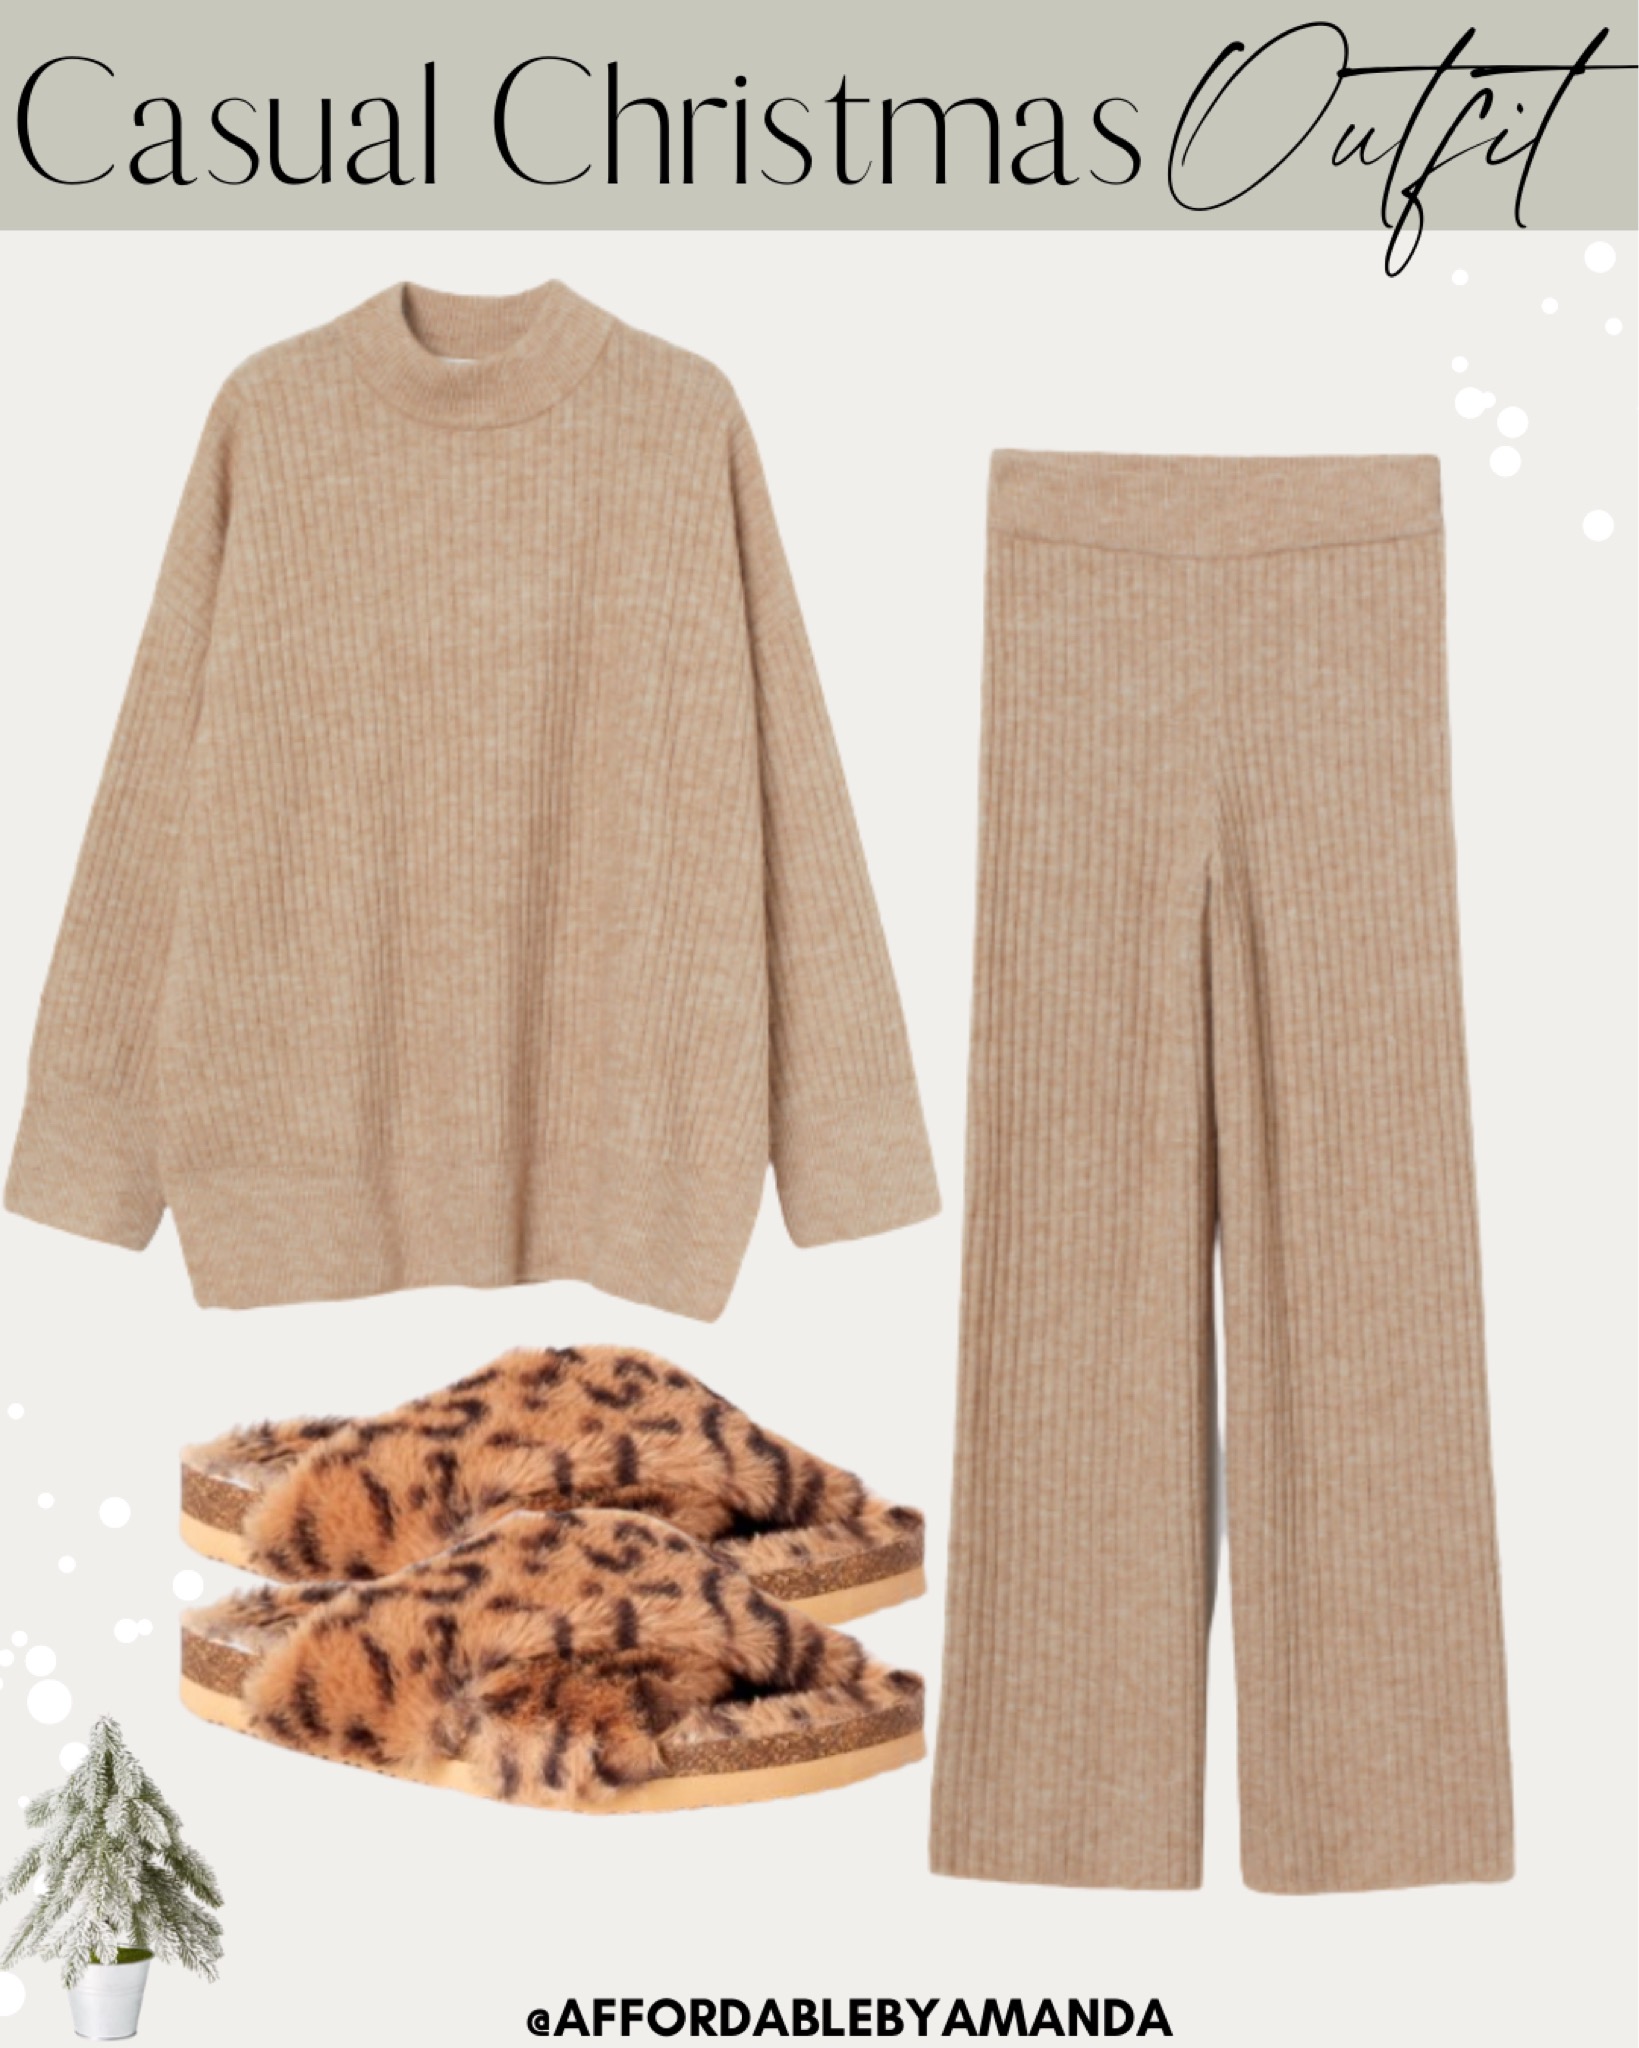 Casual Christmas Outfits | Relaxed-fit sweater in a soft rib knit with wool | Soft, knit pants with a high waist, covered, elasticized waistband | Affordable by Amanda